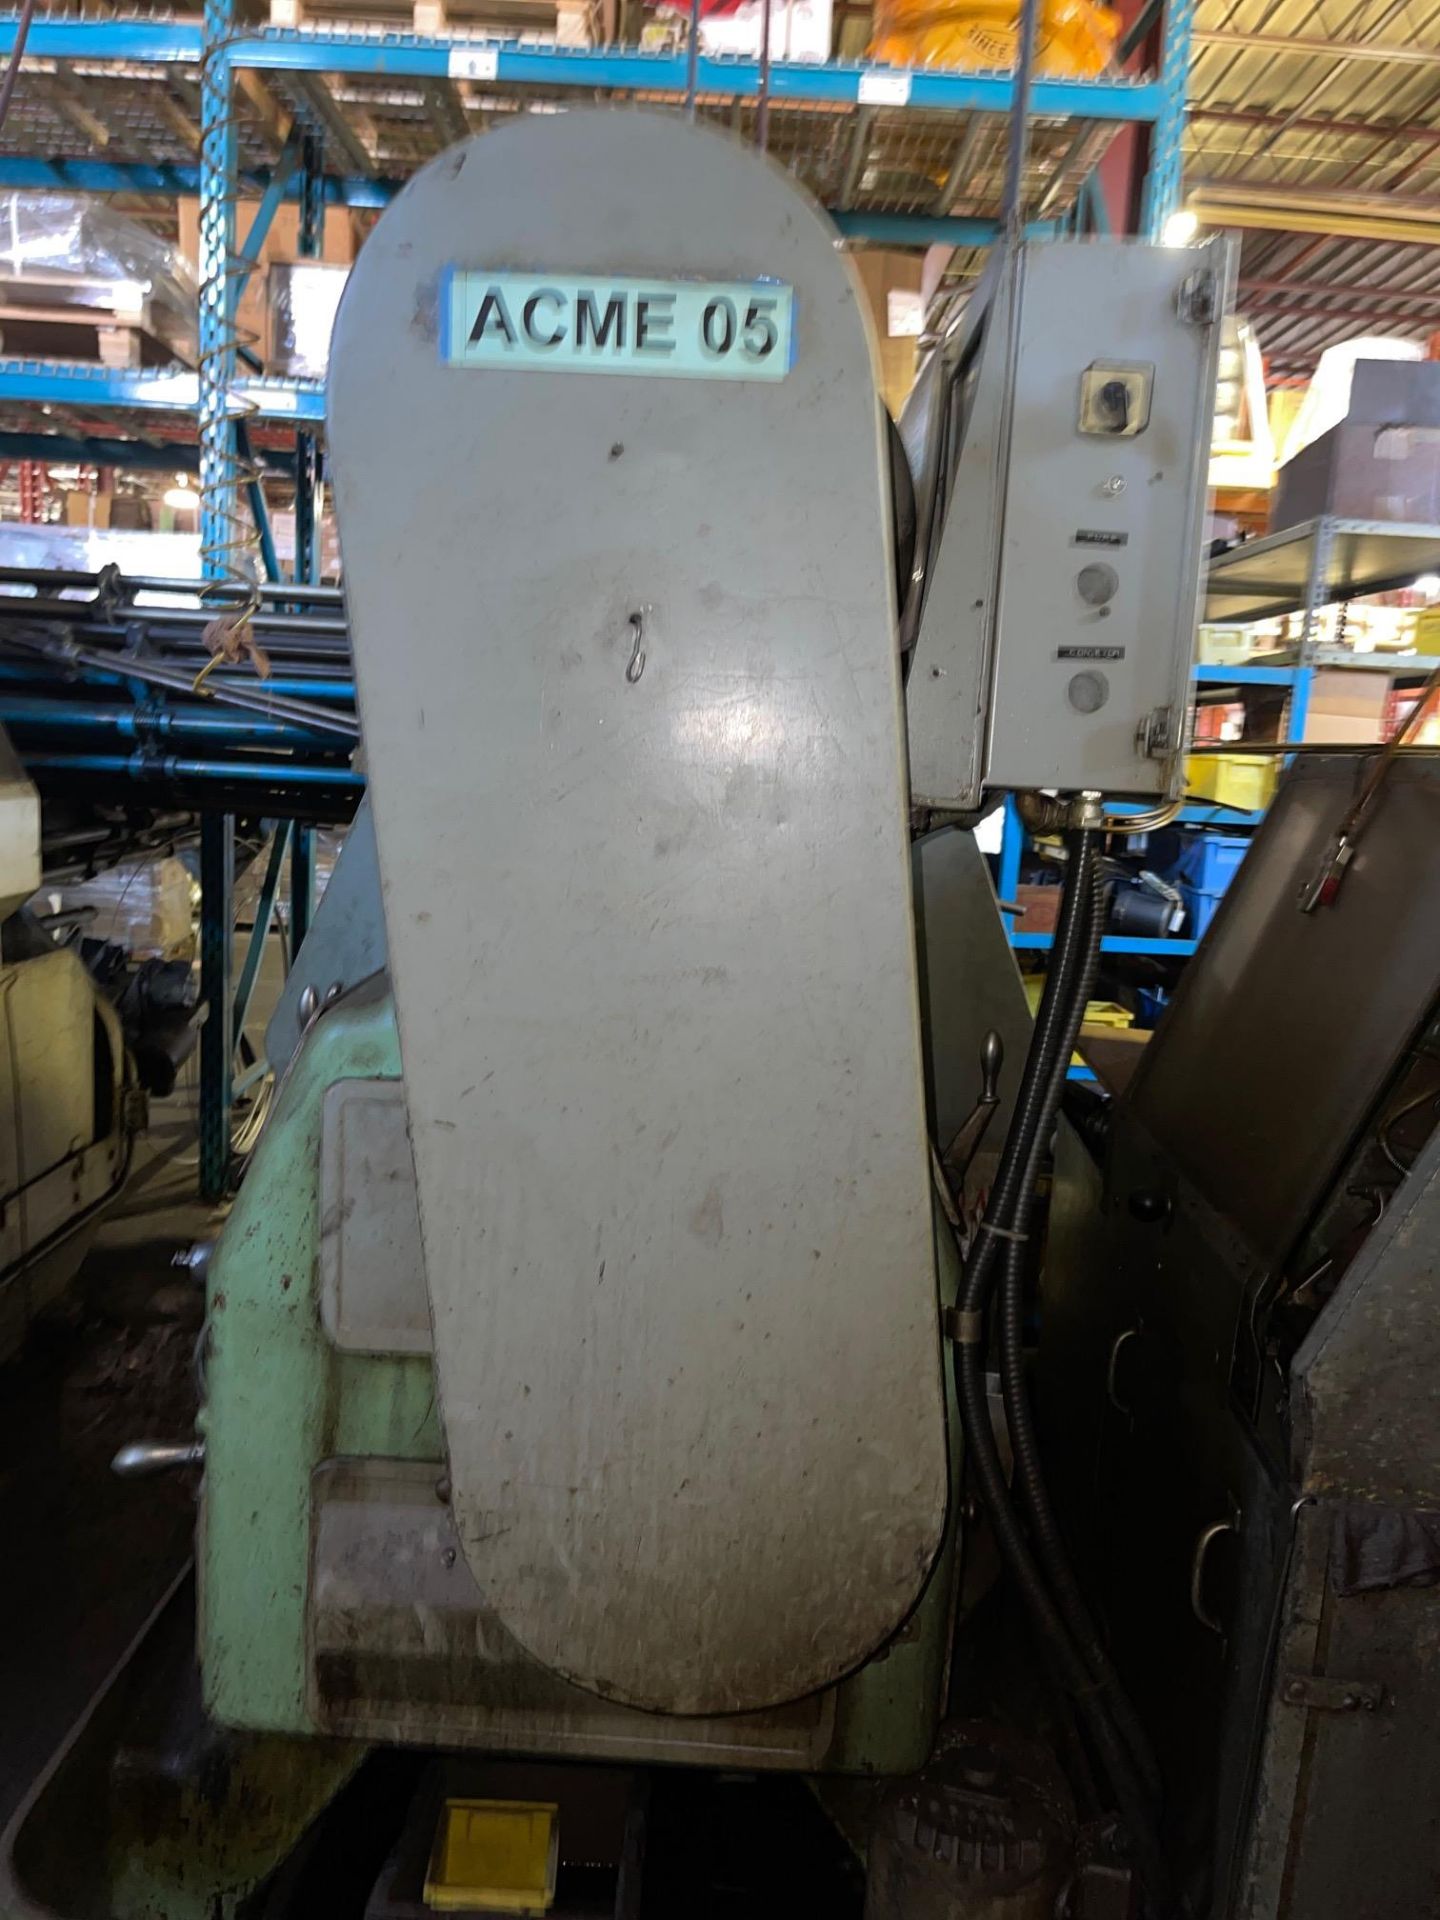 ACME # 005, THE NATIONAL ACME CO, SIZE. 1”, SERIAL 16-495-183, RIGGING $400